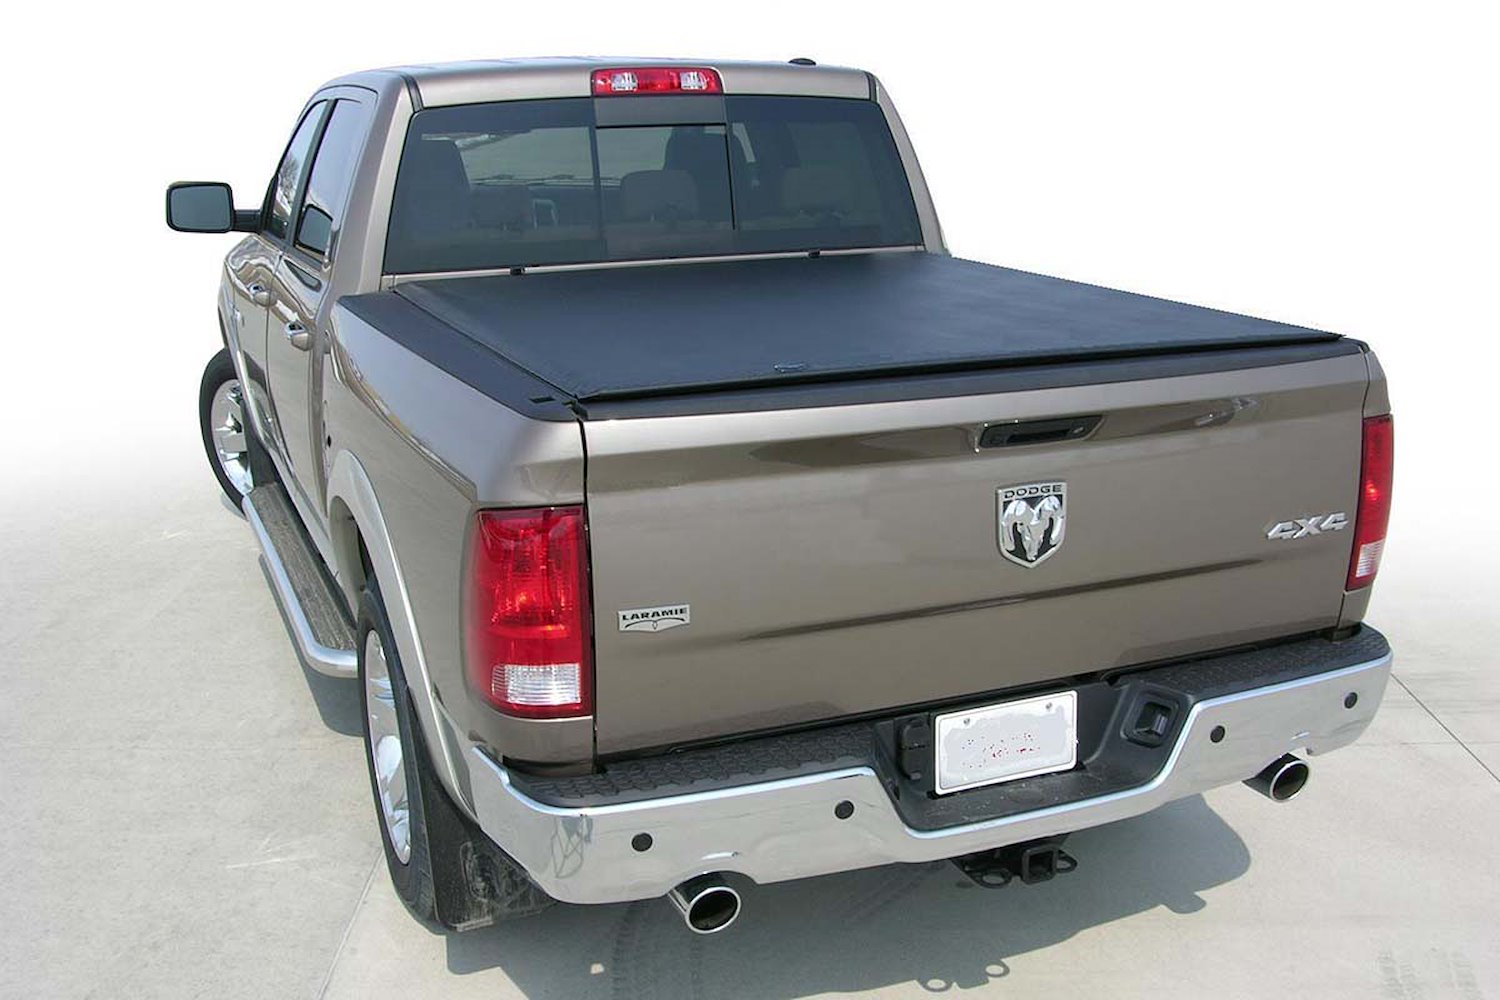 VANISH Roll-Up Tonneau Cover, 2009-2018 Ram 1500, Fits Ram Select Classic, 2010-2018 Ram 2500/3500, with 6 ft. 4 in. Bed